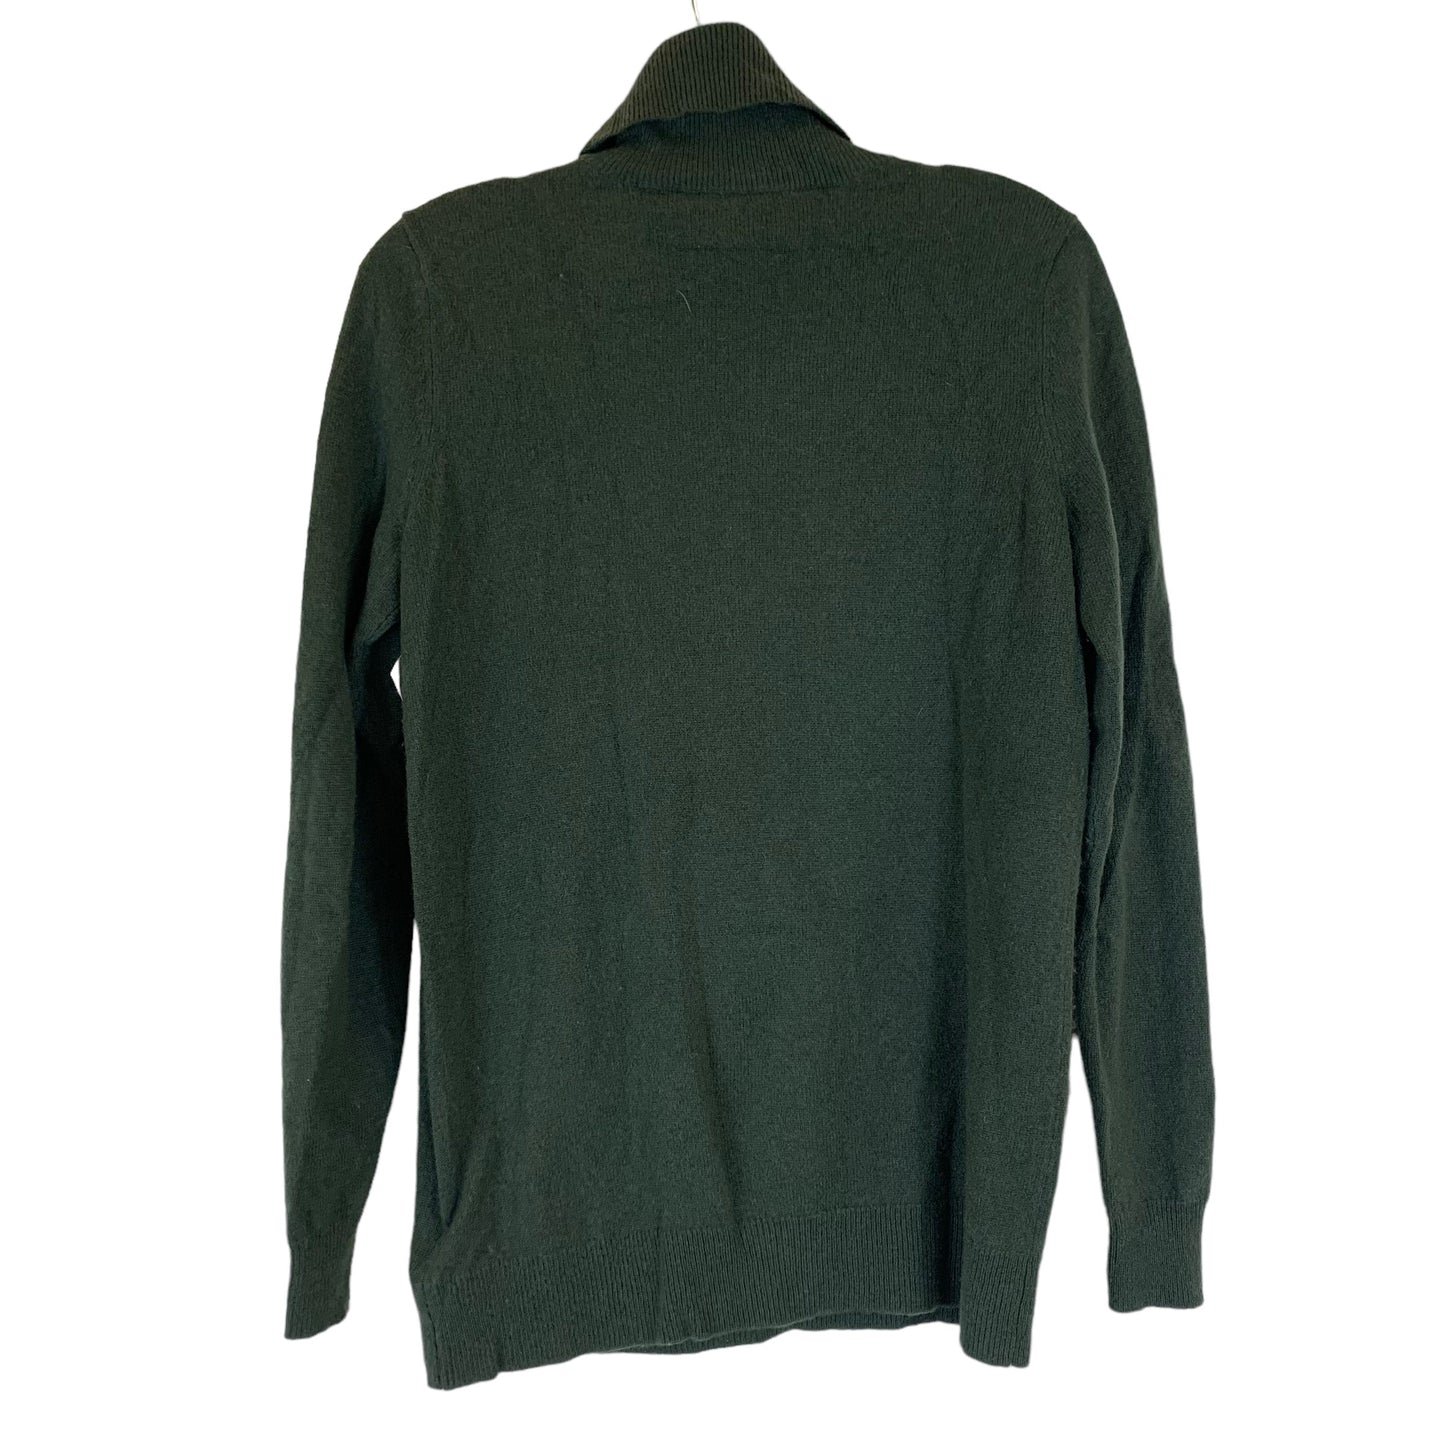 Green Sweater Cashmere C by BLOOMINGDALES, Size M